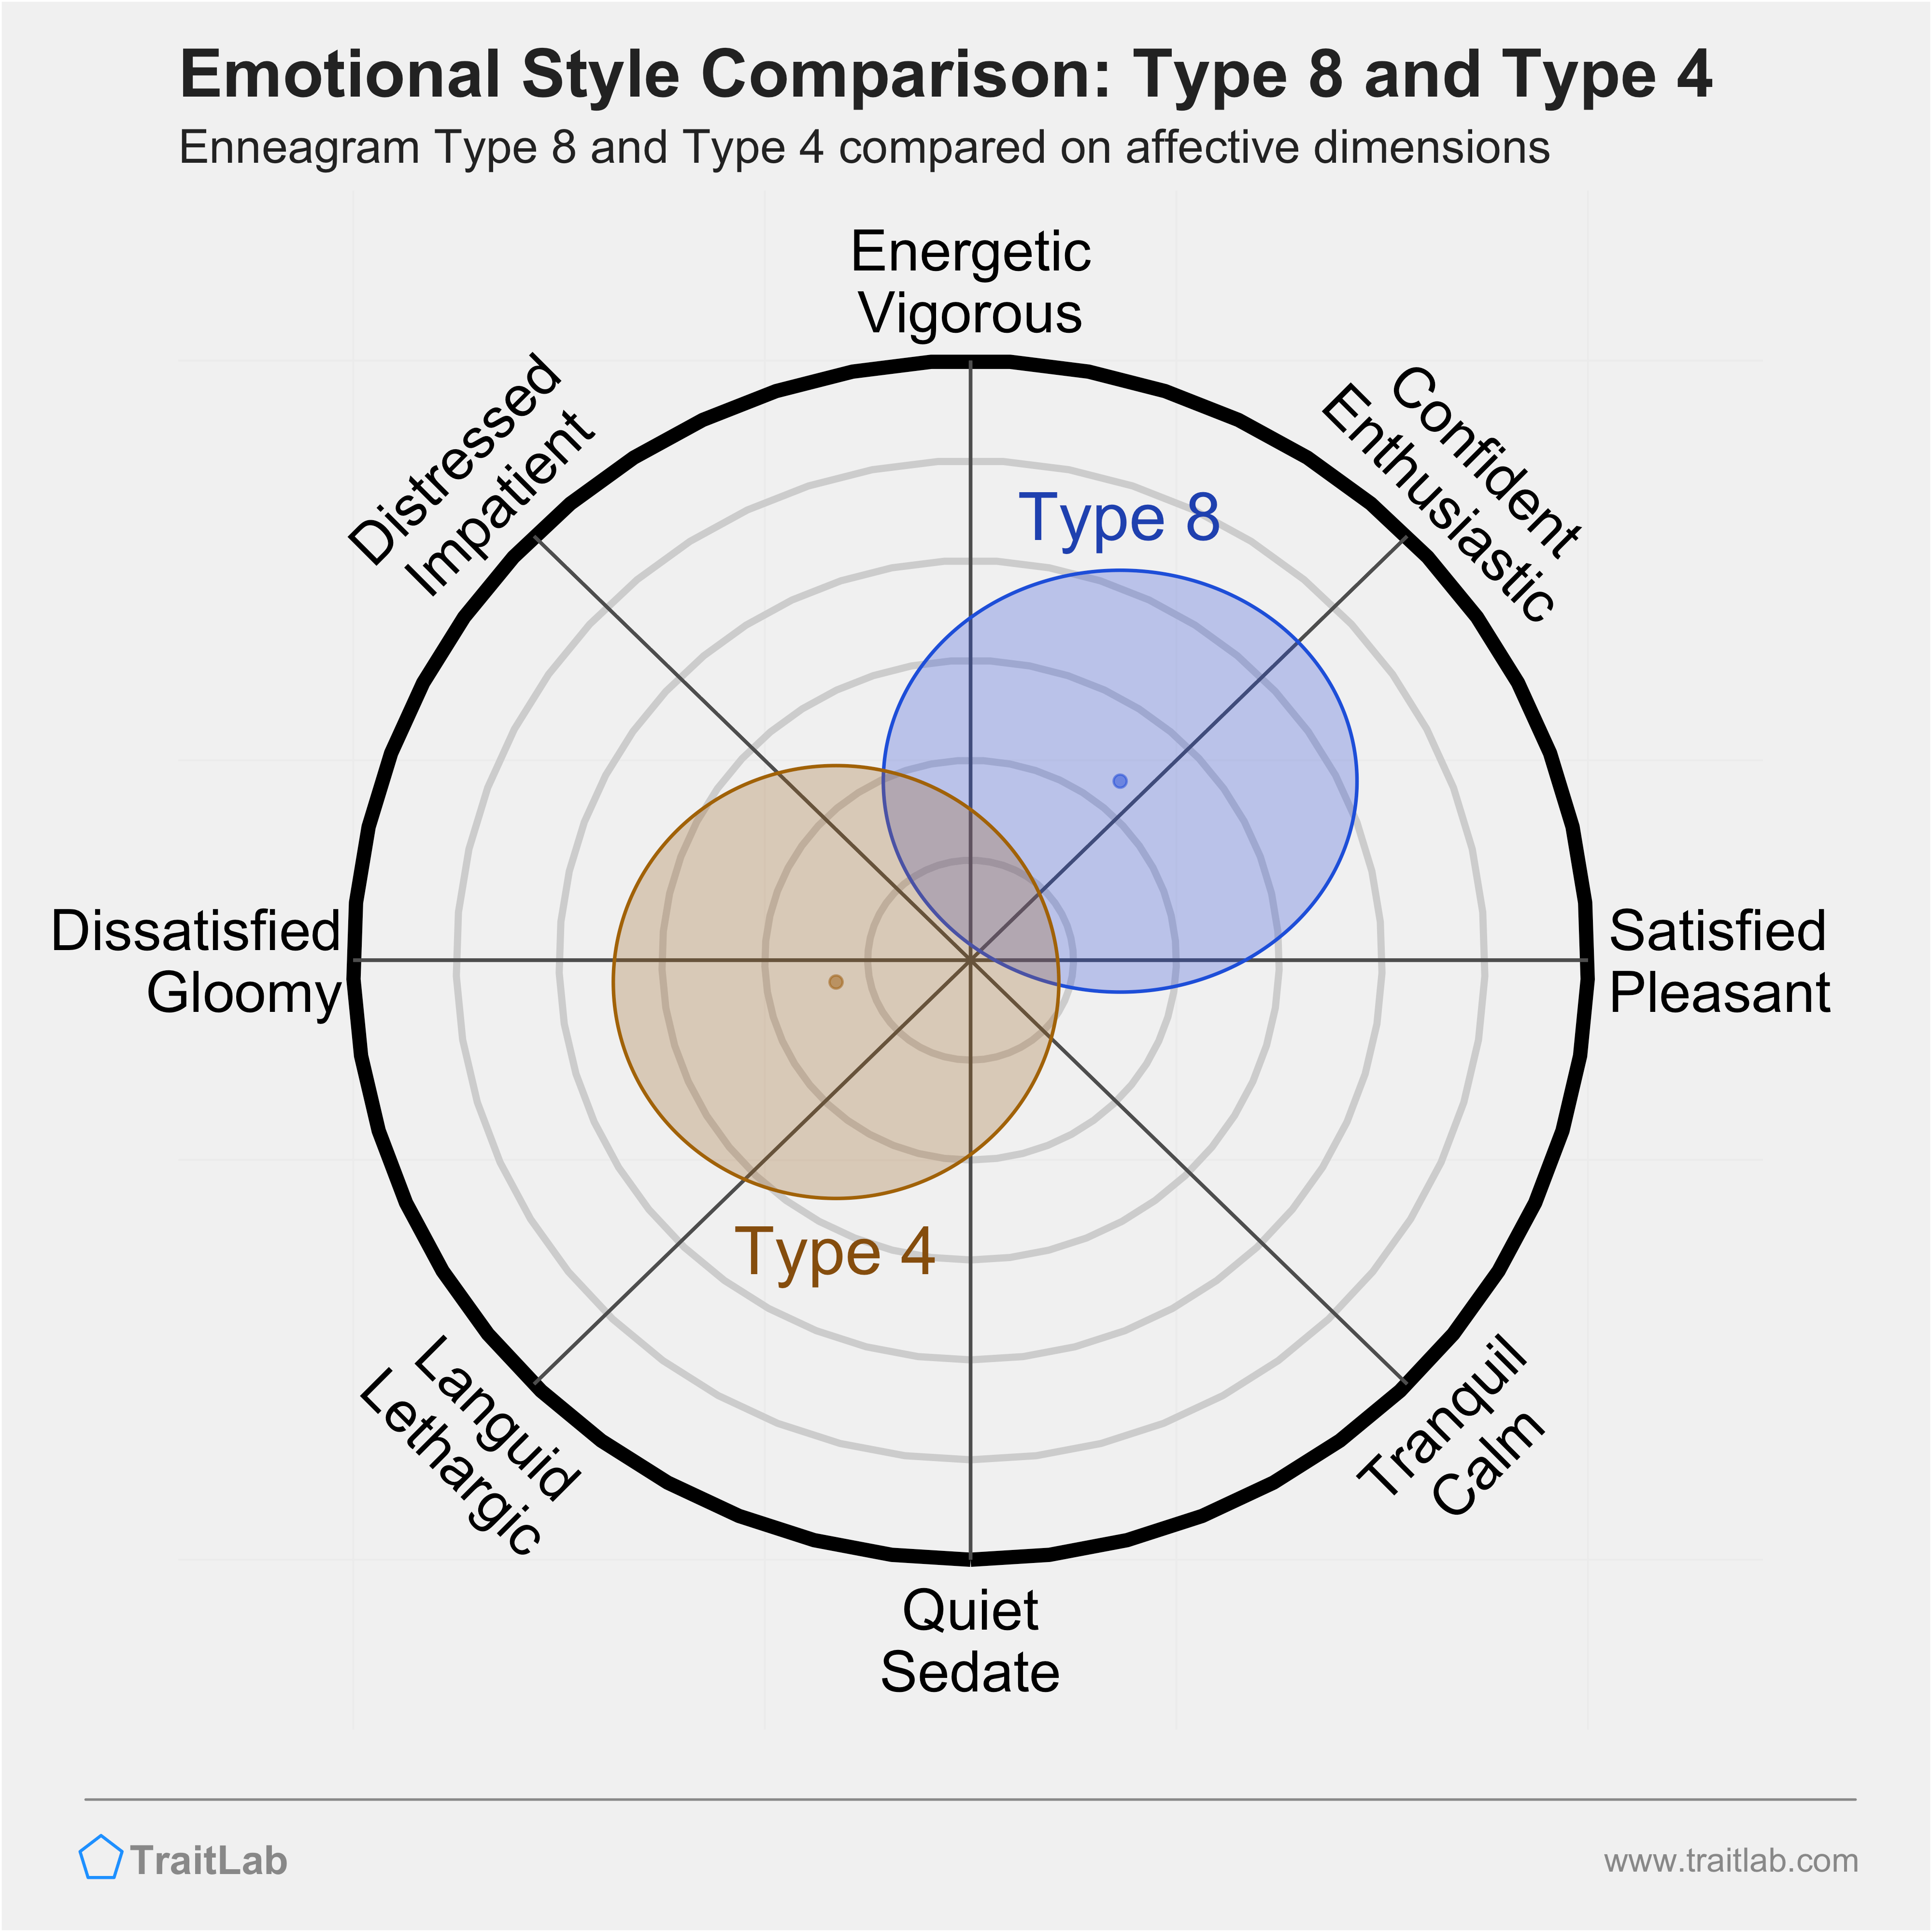 Type 8 and Type 4 comparison across emotional (affective) dimensions